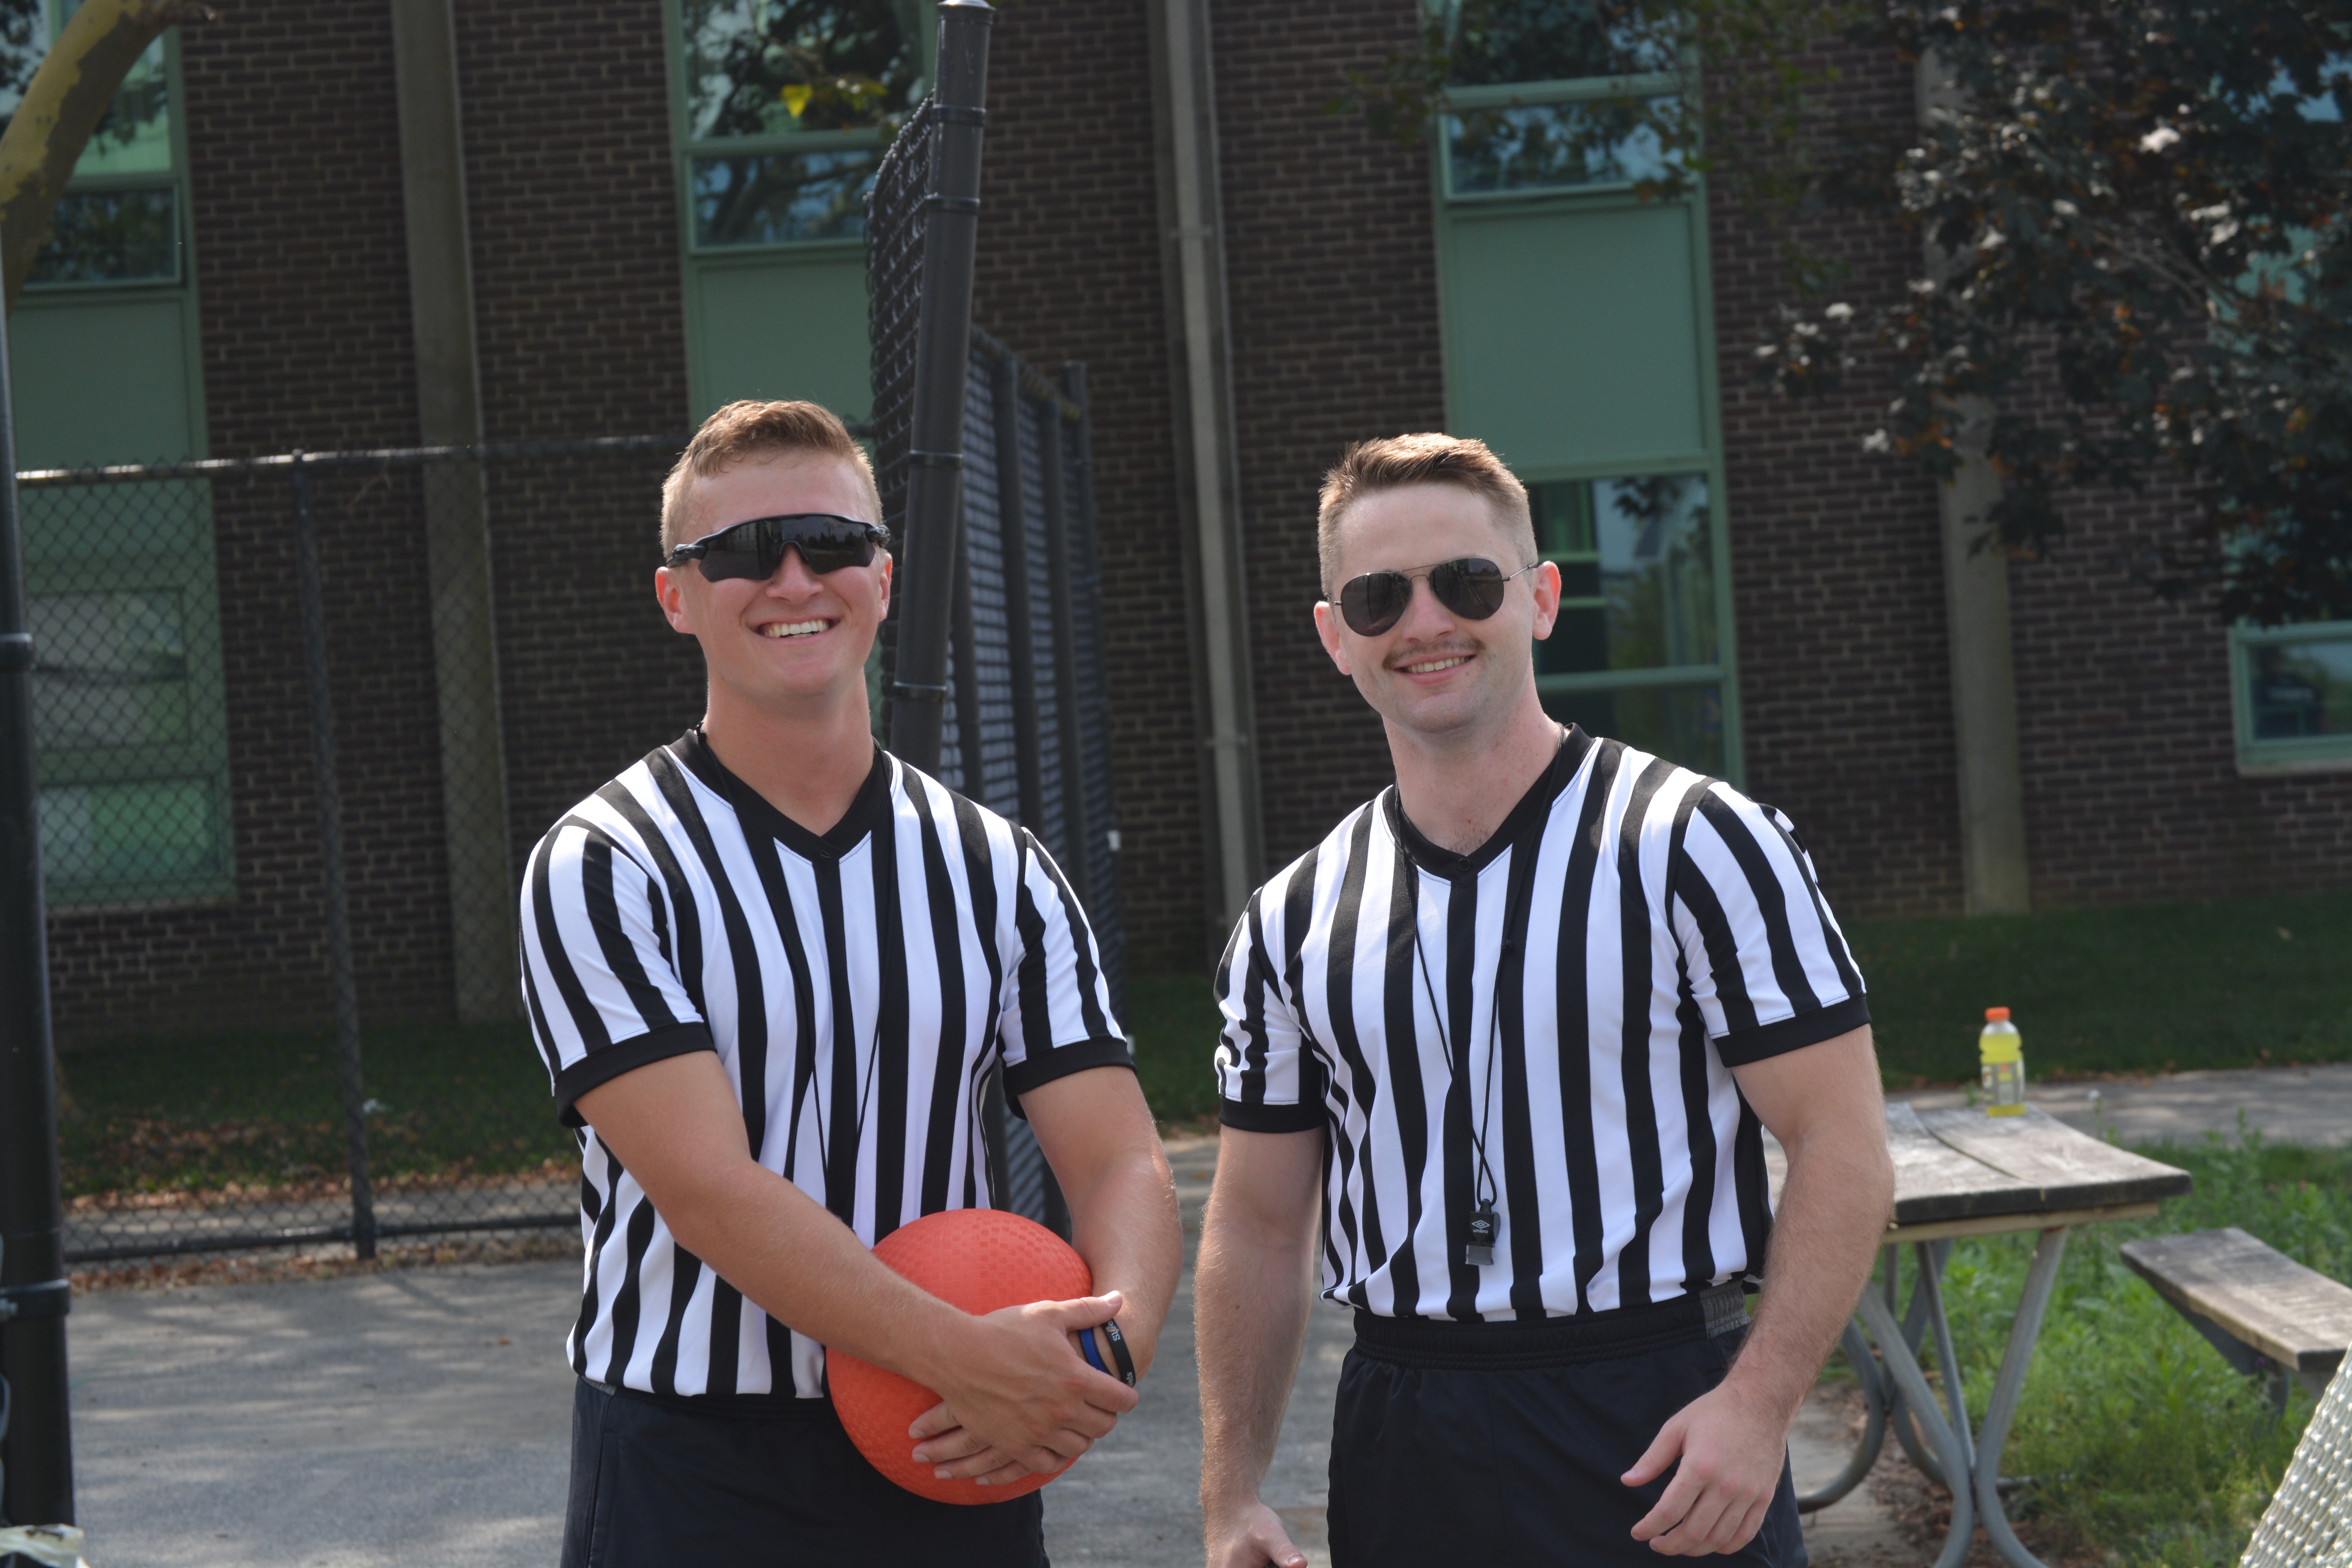 All Star referees!